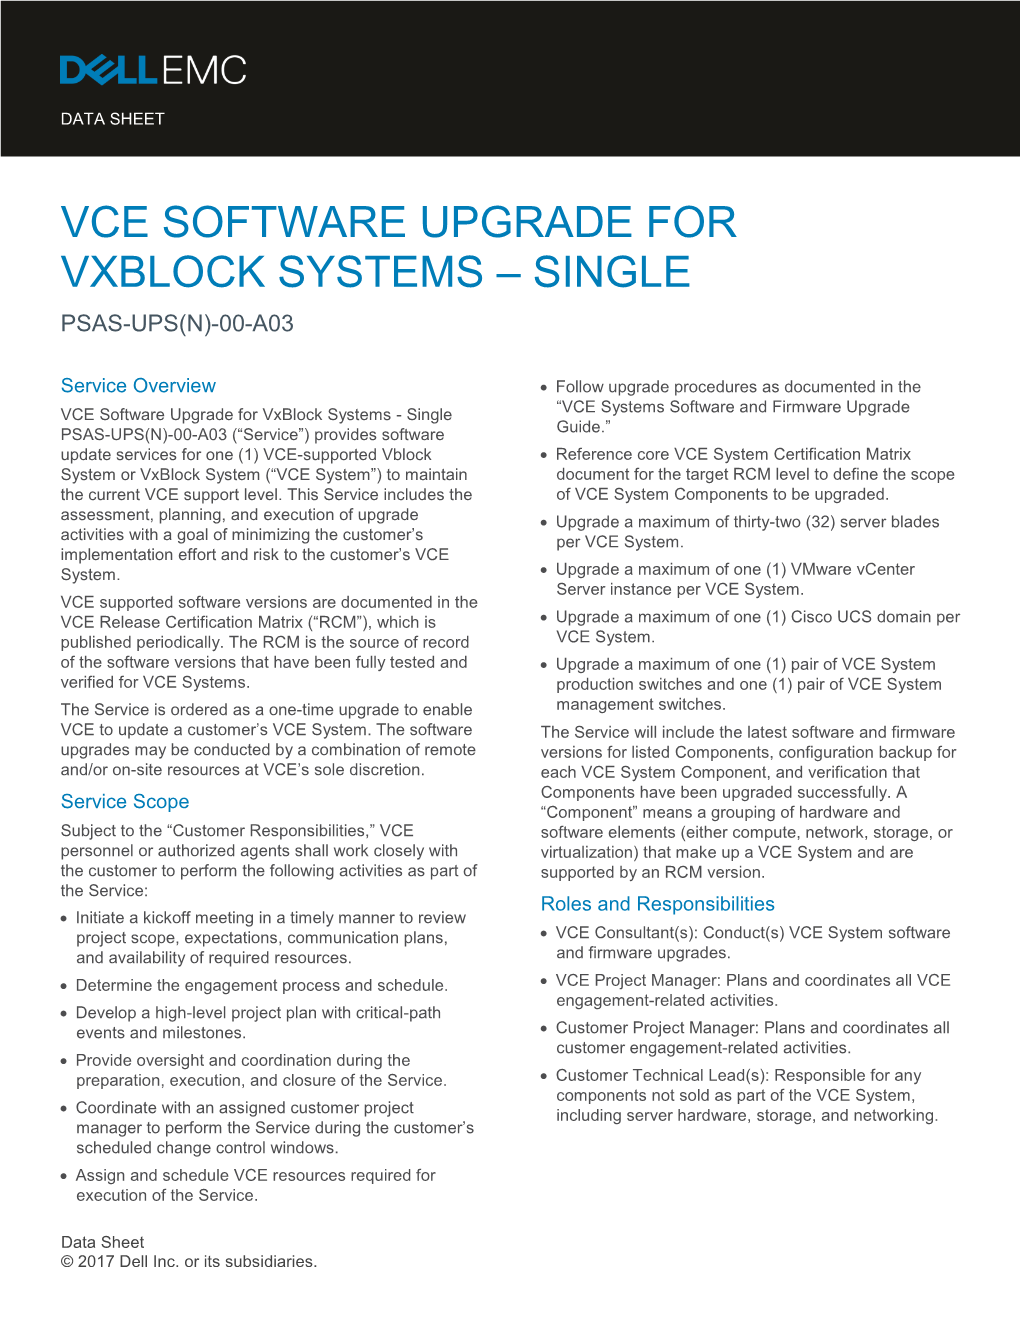 Vce Software Upgrade for Vxblock Systems – Single Psas-Ups(N)-00-A03